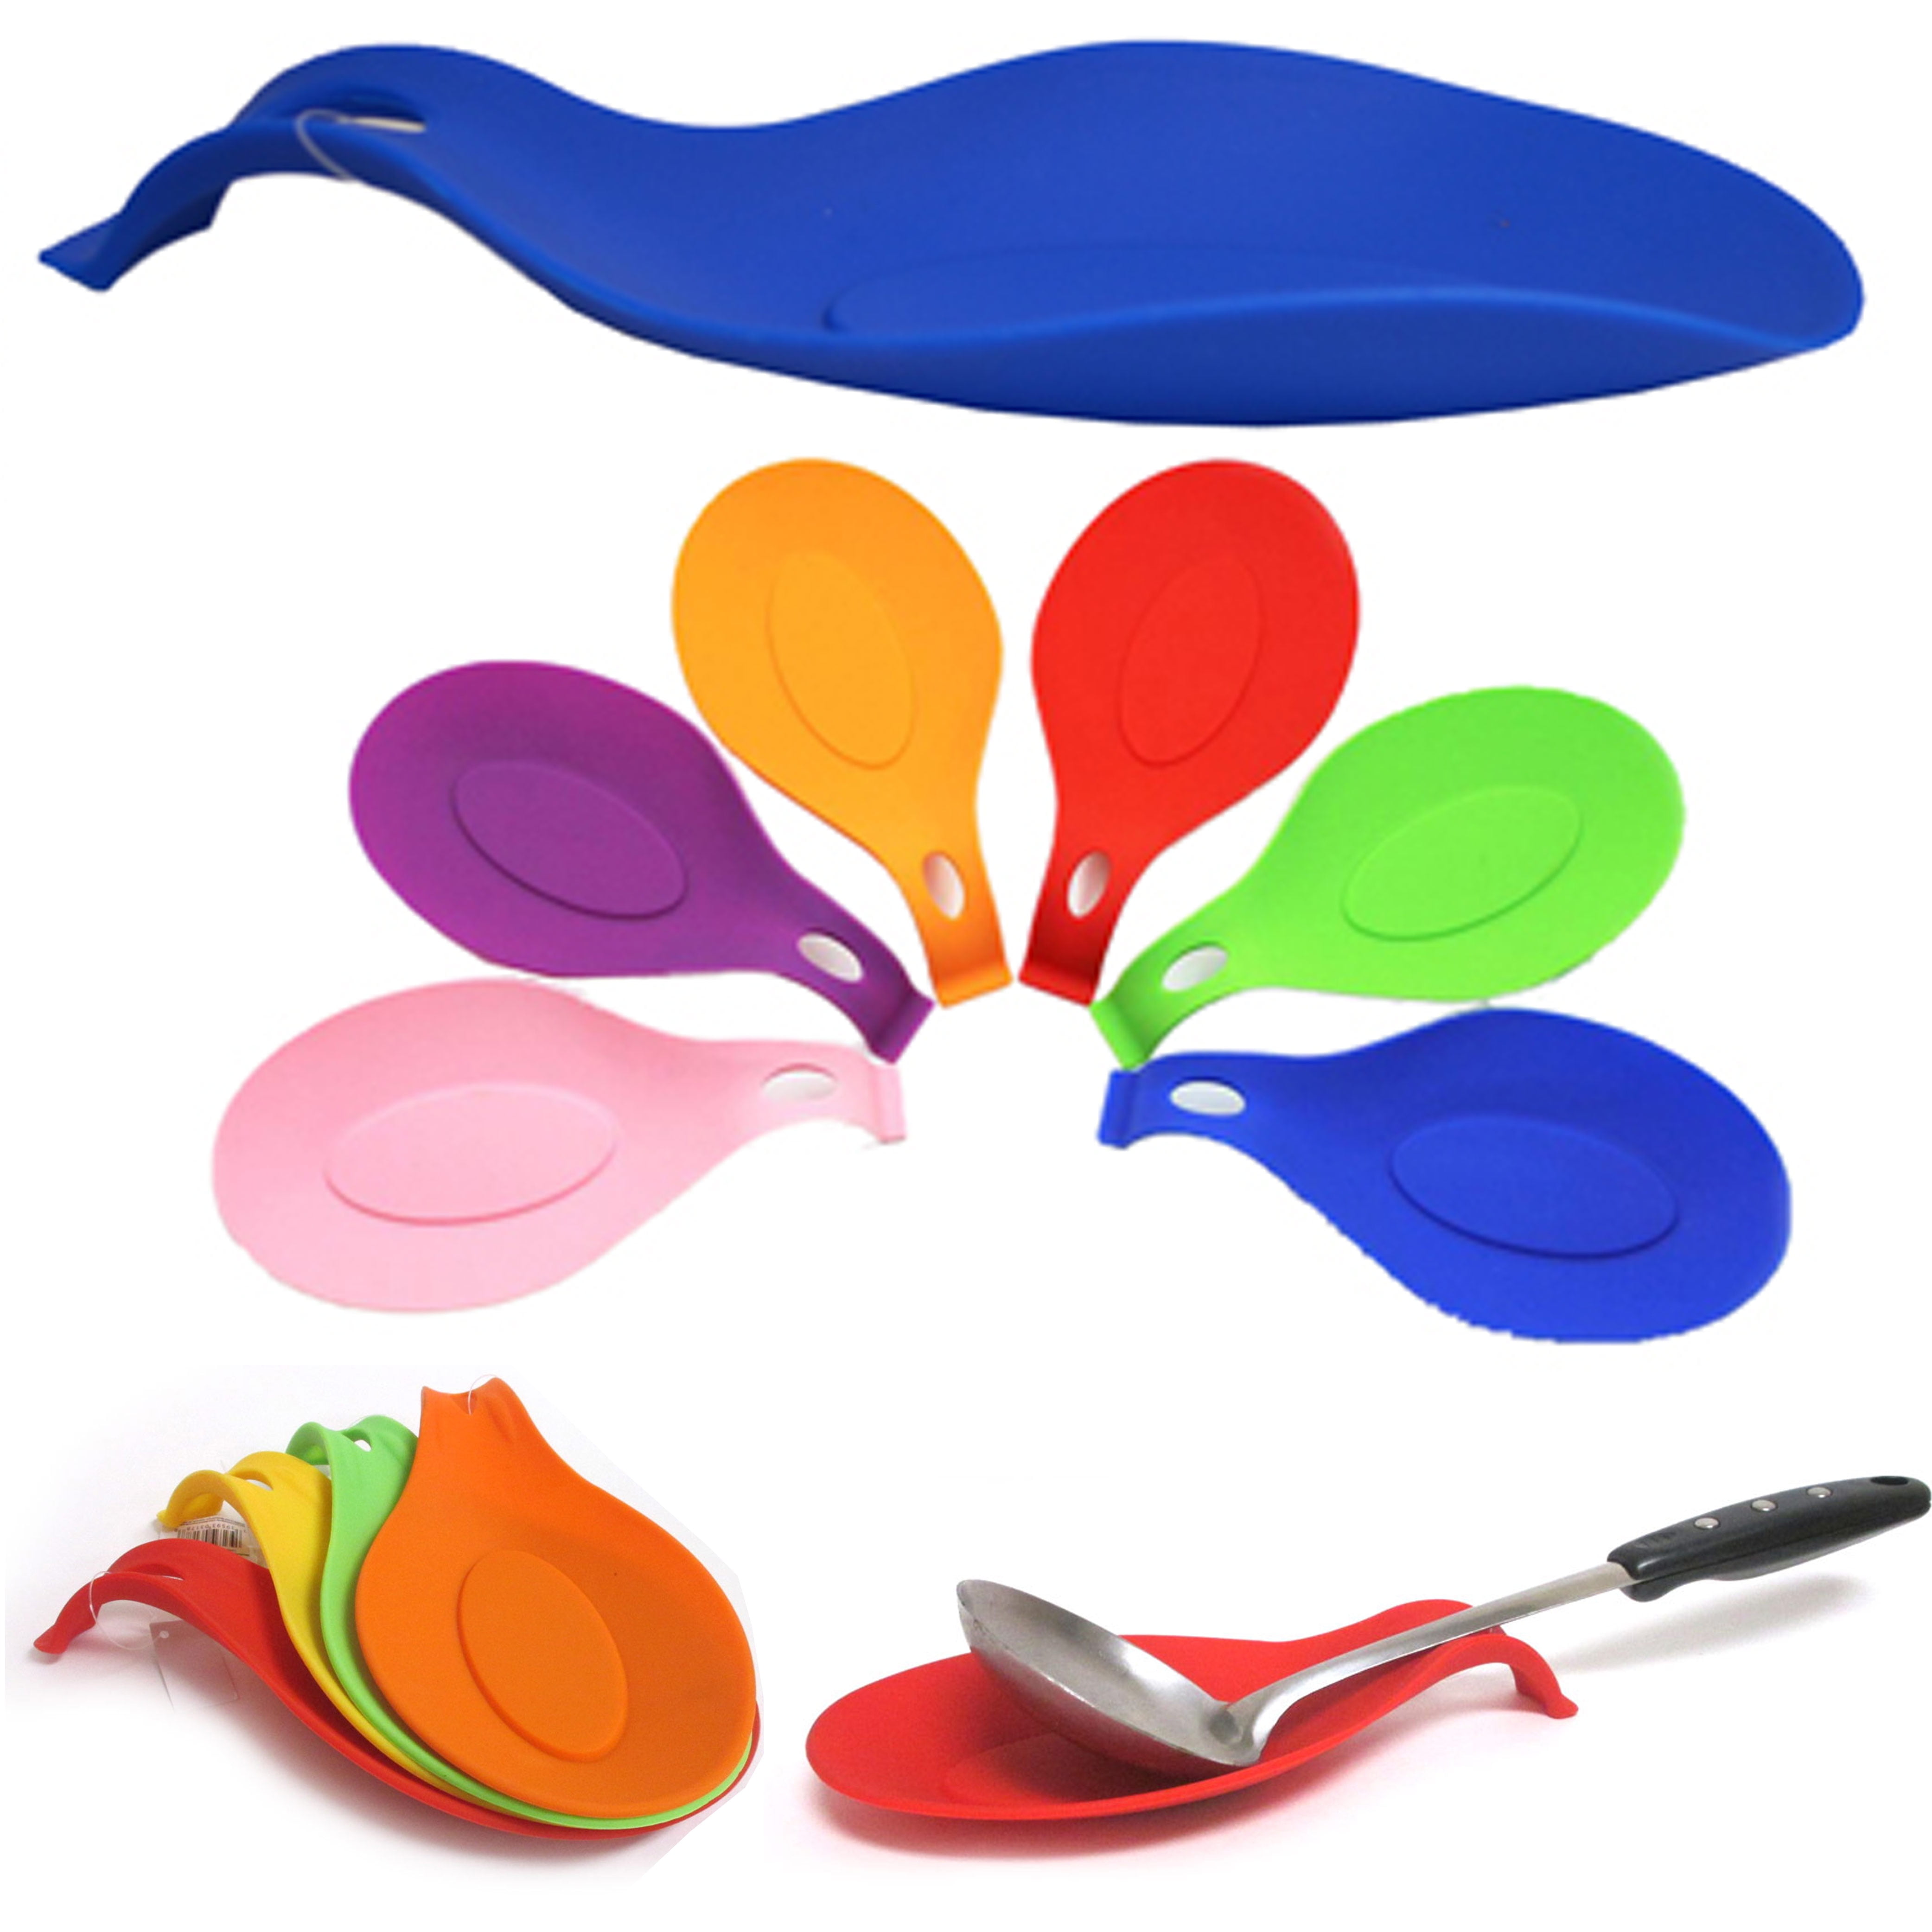 Silicone Spoon Rest Heat Resistant Tea Bag Tidy Holder Cooking Utensil Dish WA 